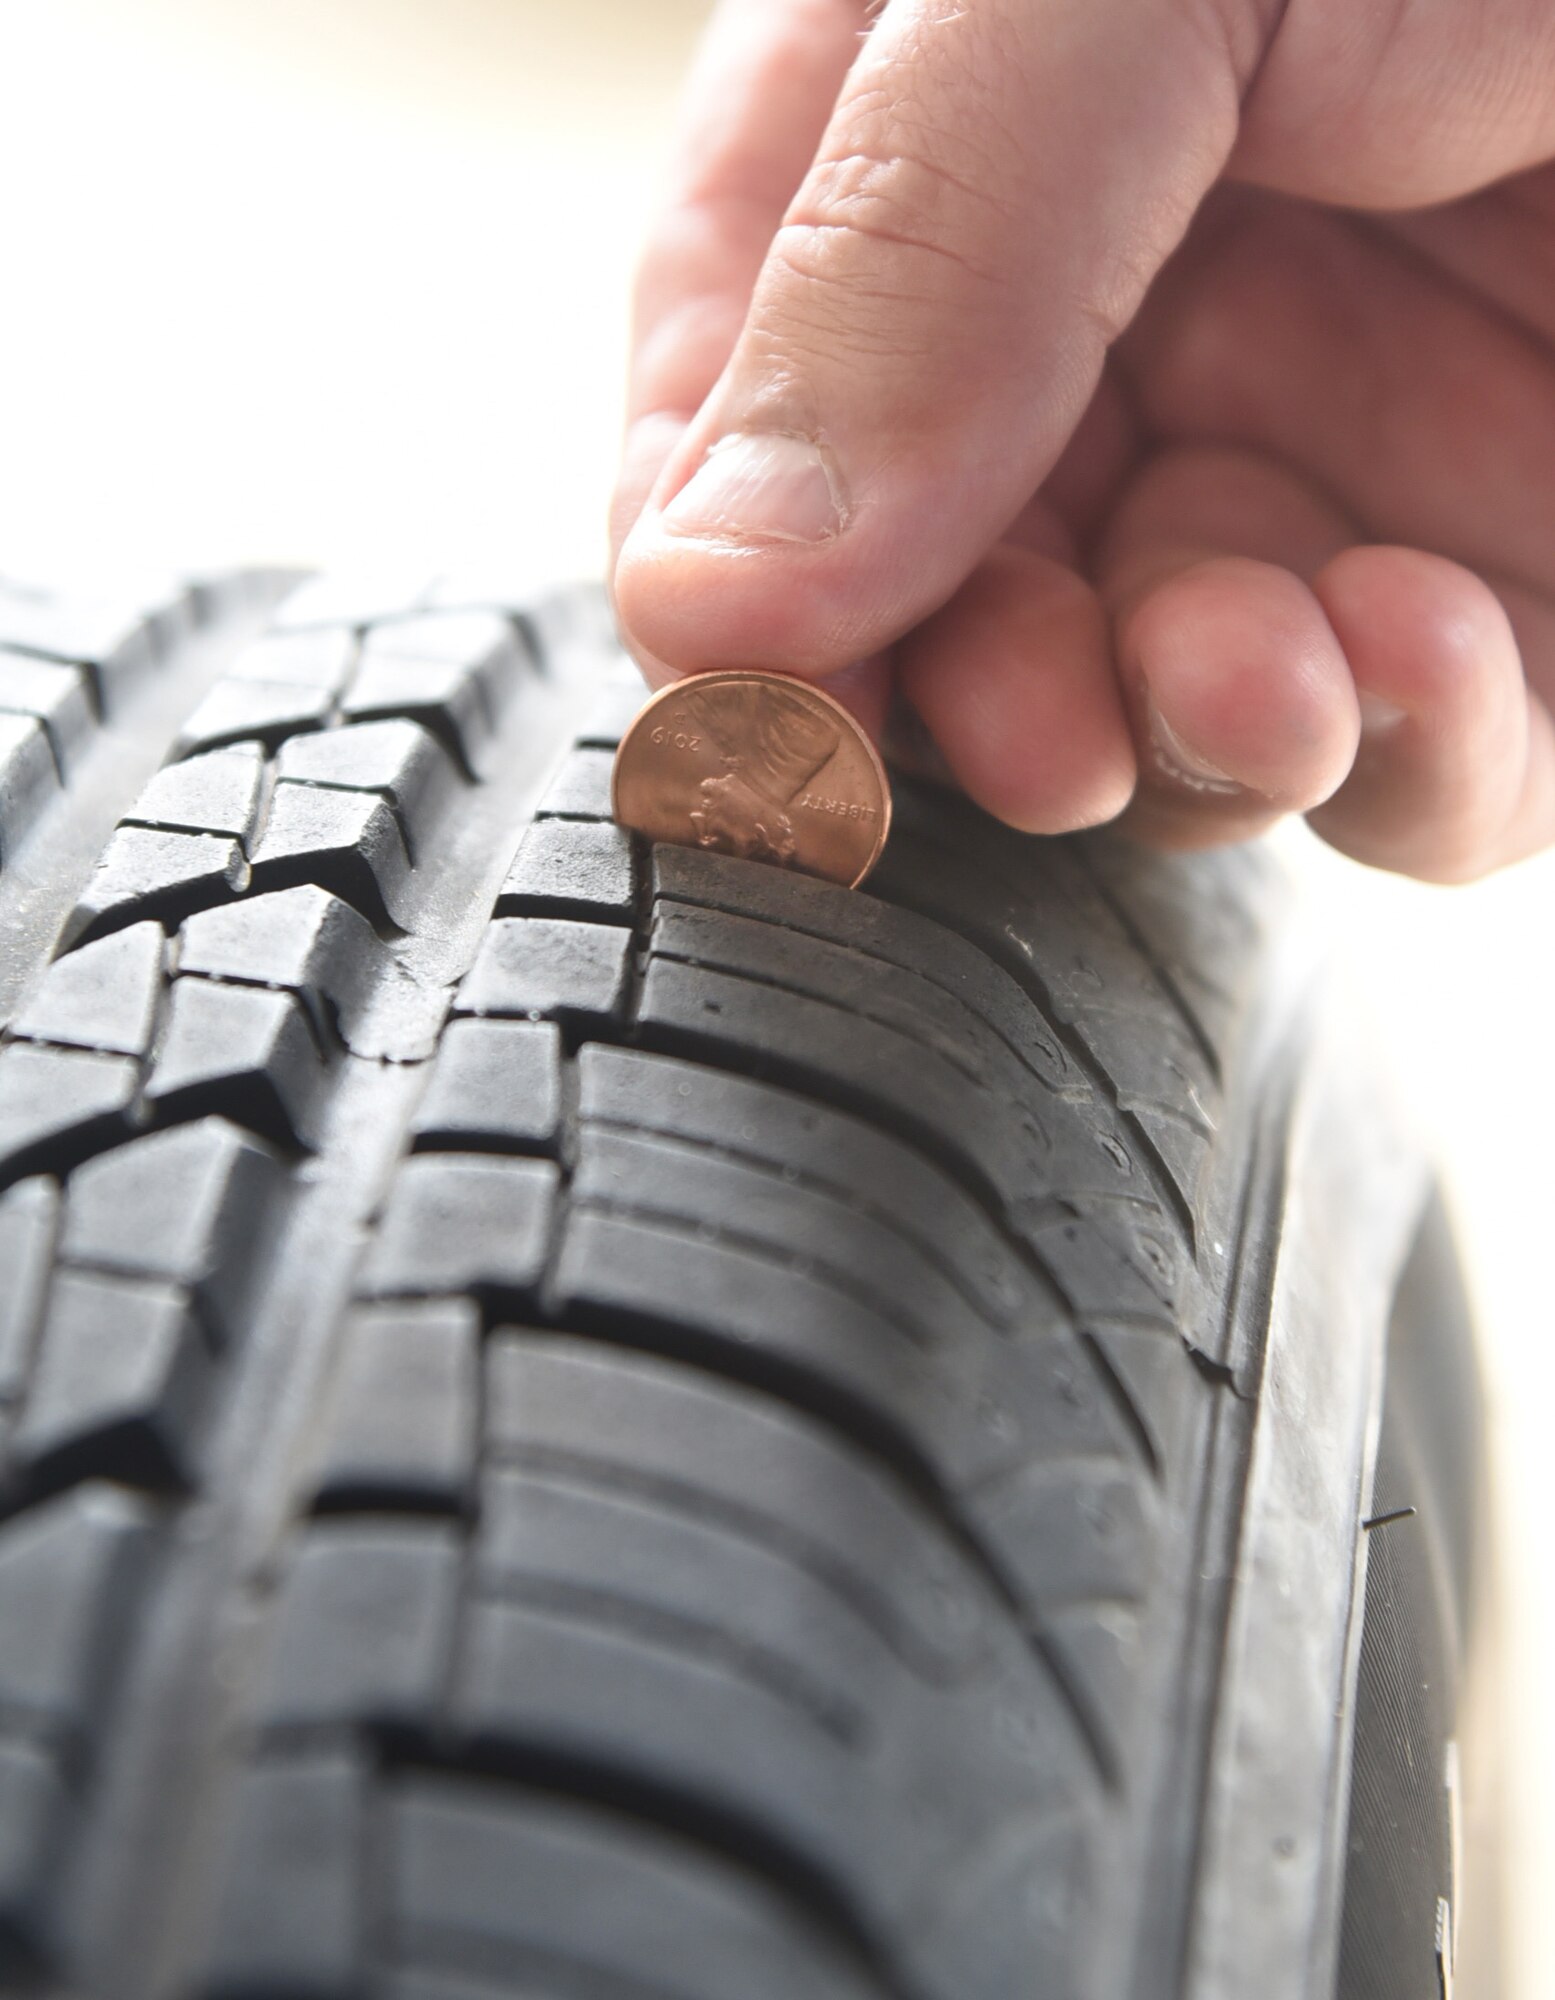 An image depicting the "penny test" to check the tread of your tires.